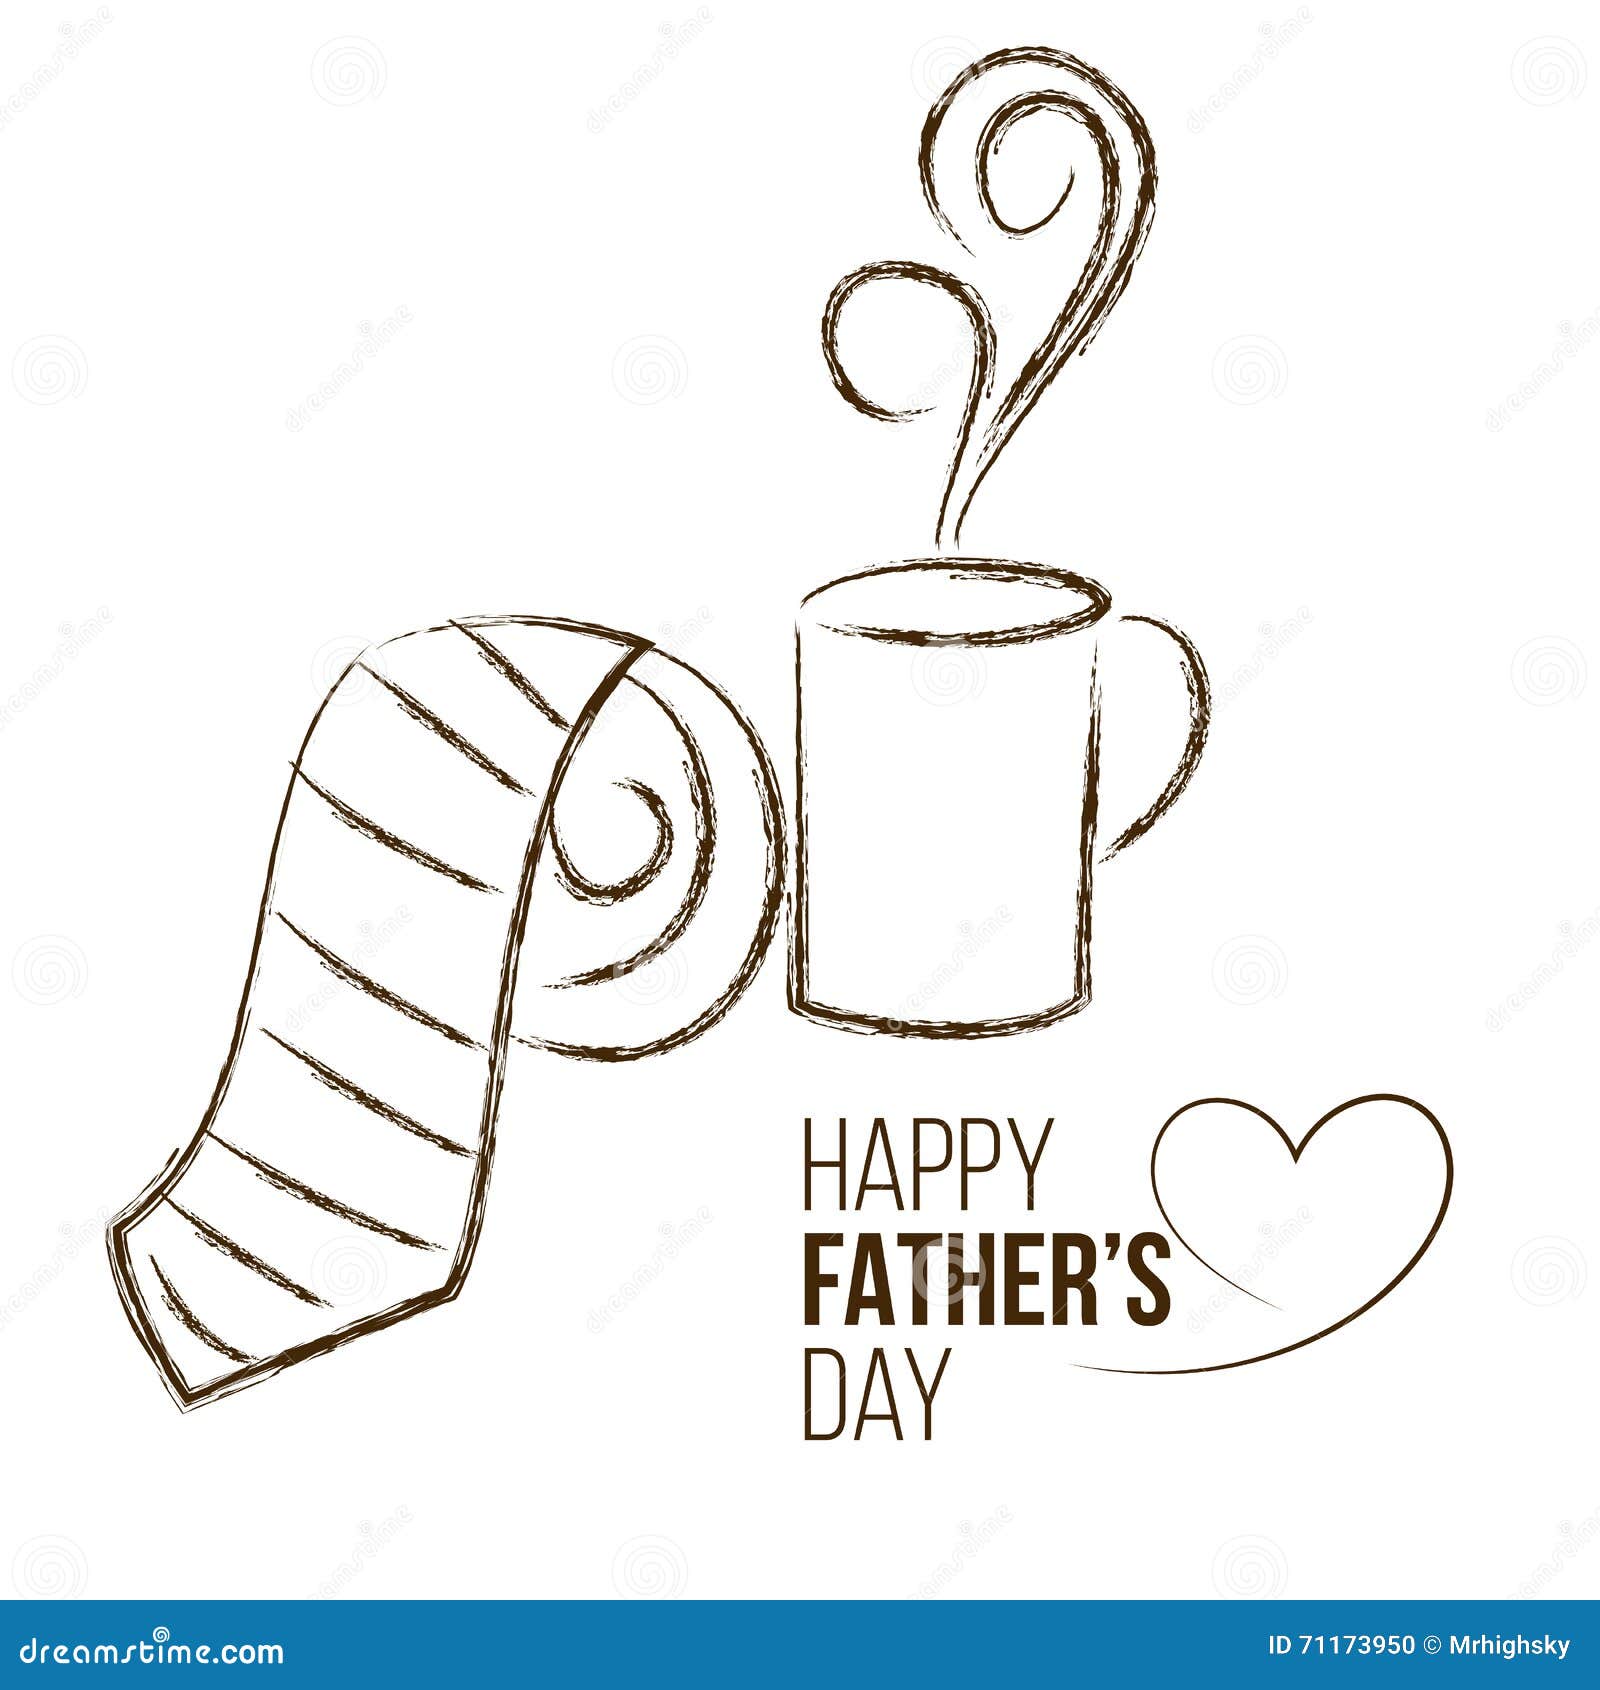 Download Tie And Coffee Mug Sketch Father's Day Stock Vector ...